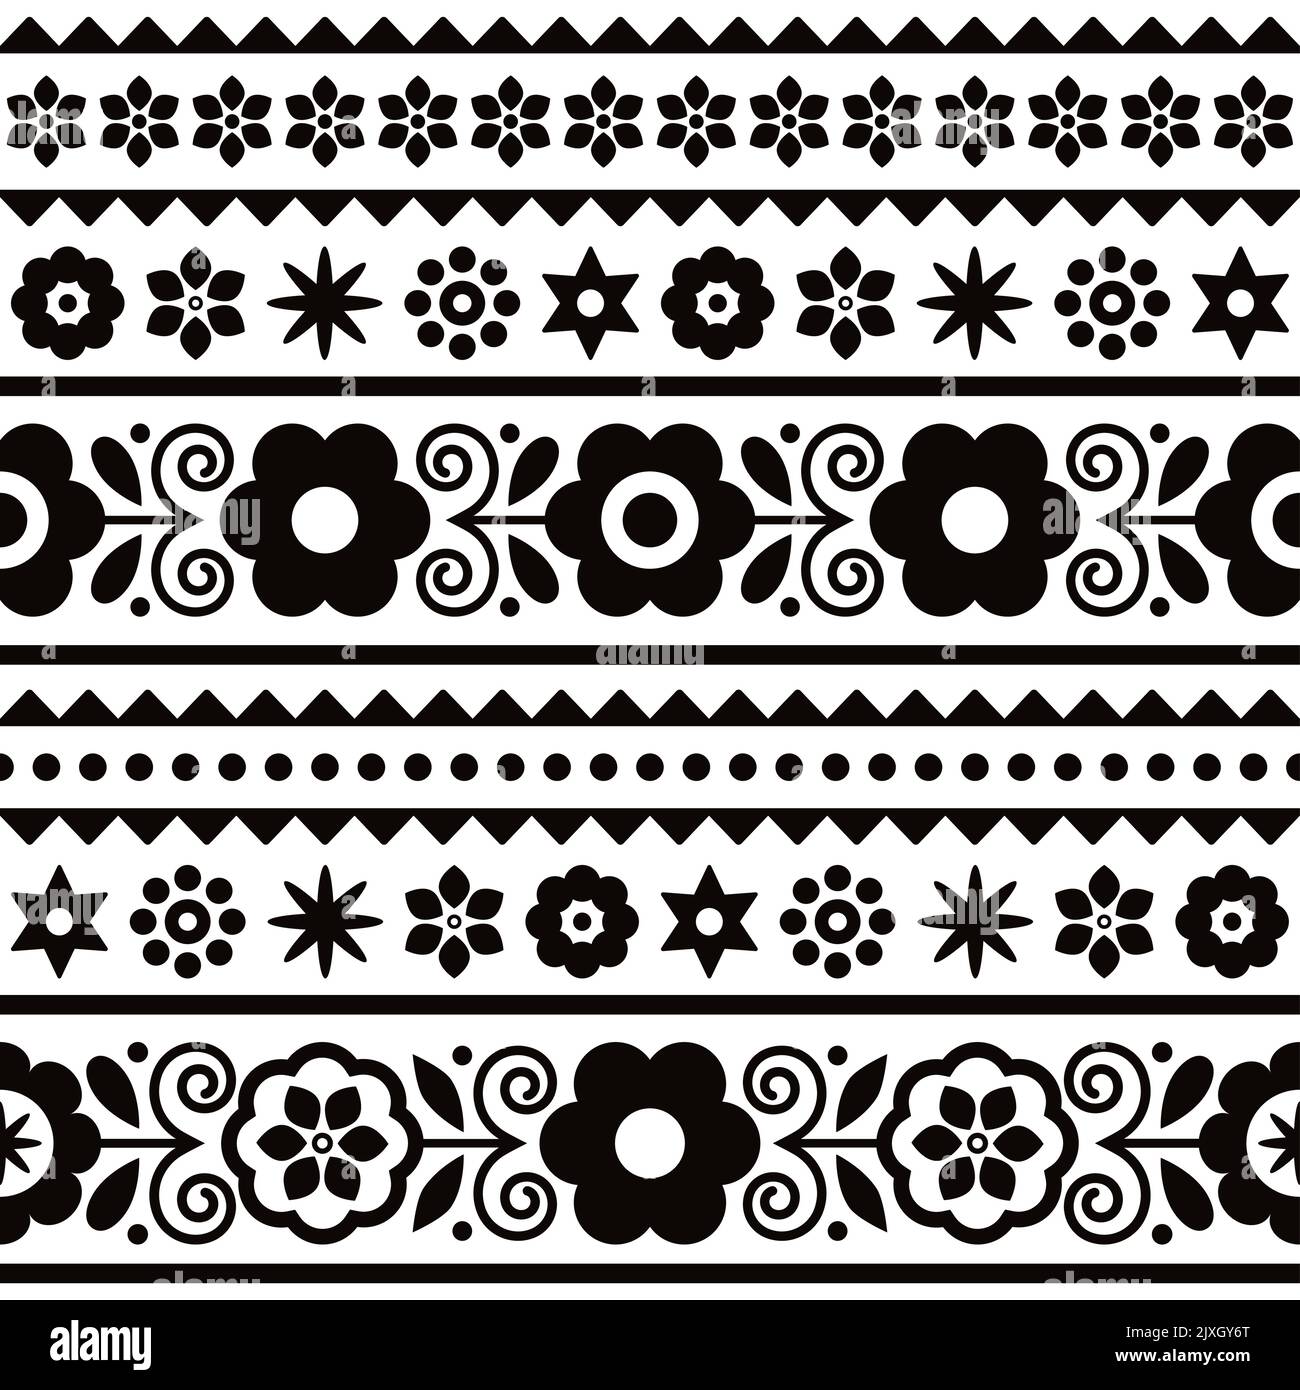 Polish traditional folk art vector seamless textile or fabric print pattern in black and white with floral motif - Lachy Sadeckie Stock Vector